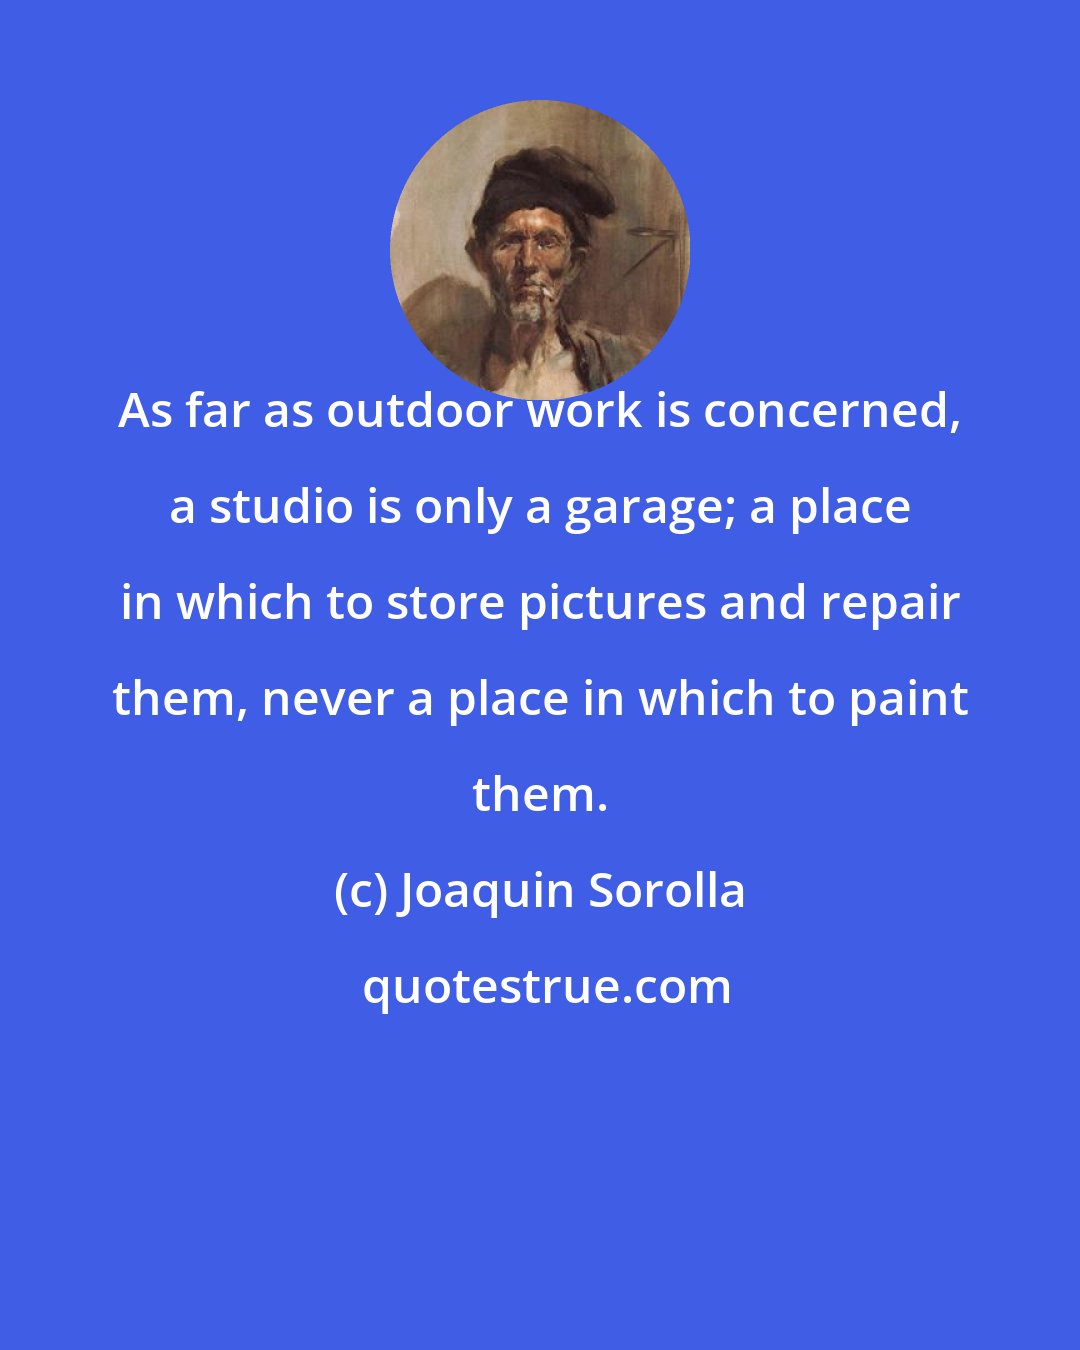 Joaquin Sorolla: As far as outdoor work is concerned, a studio is only a garage; a place in which to store pictures and repair them, never a place in which to paint them.